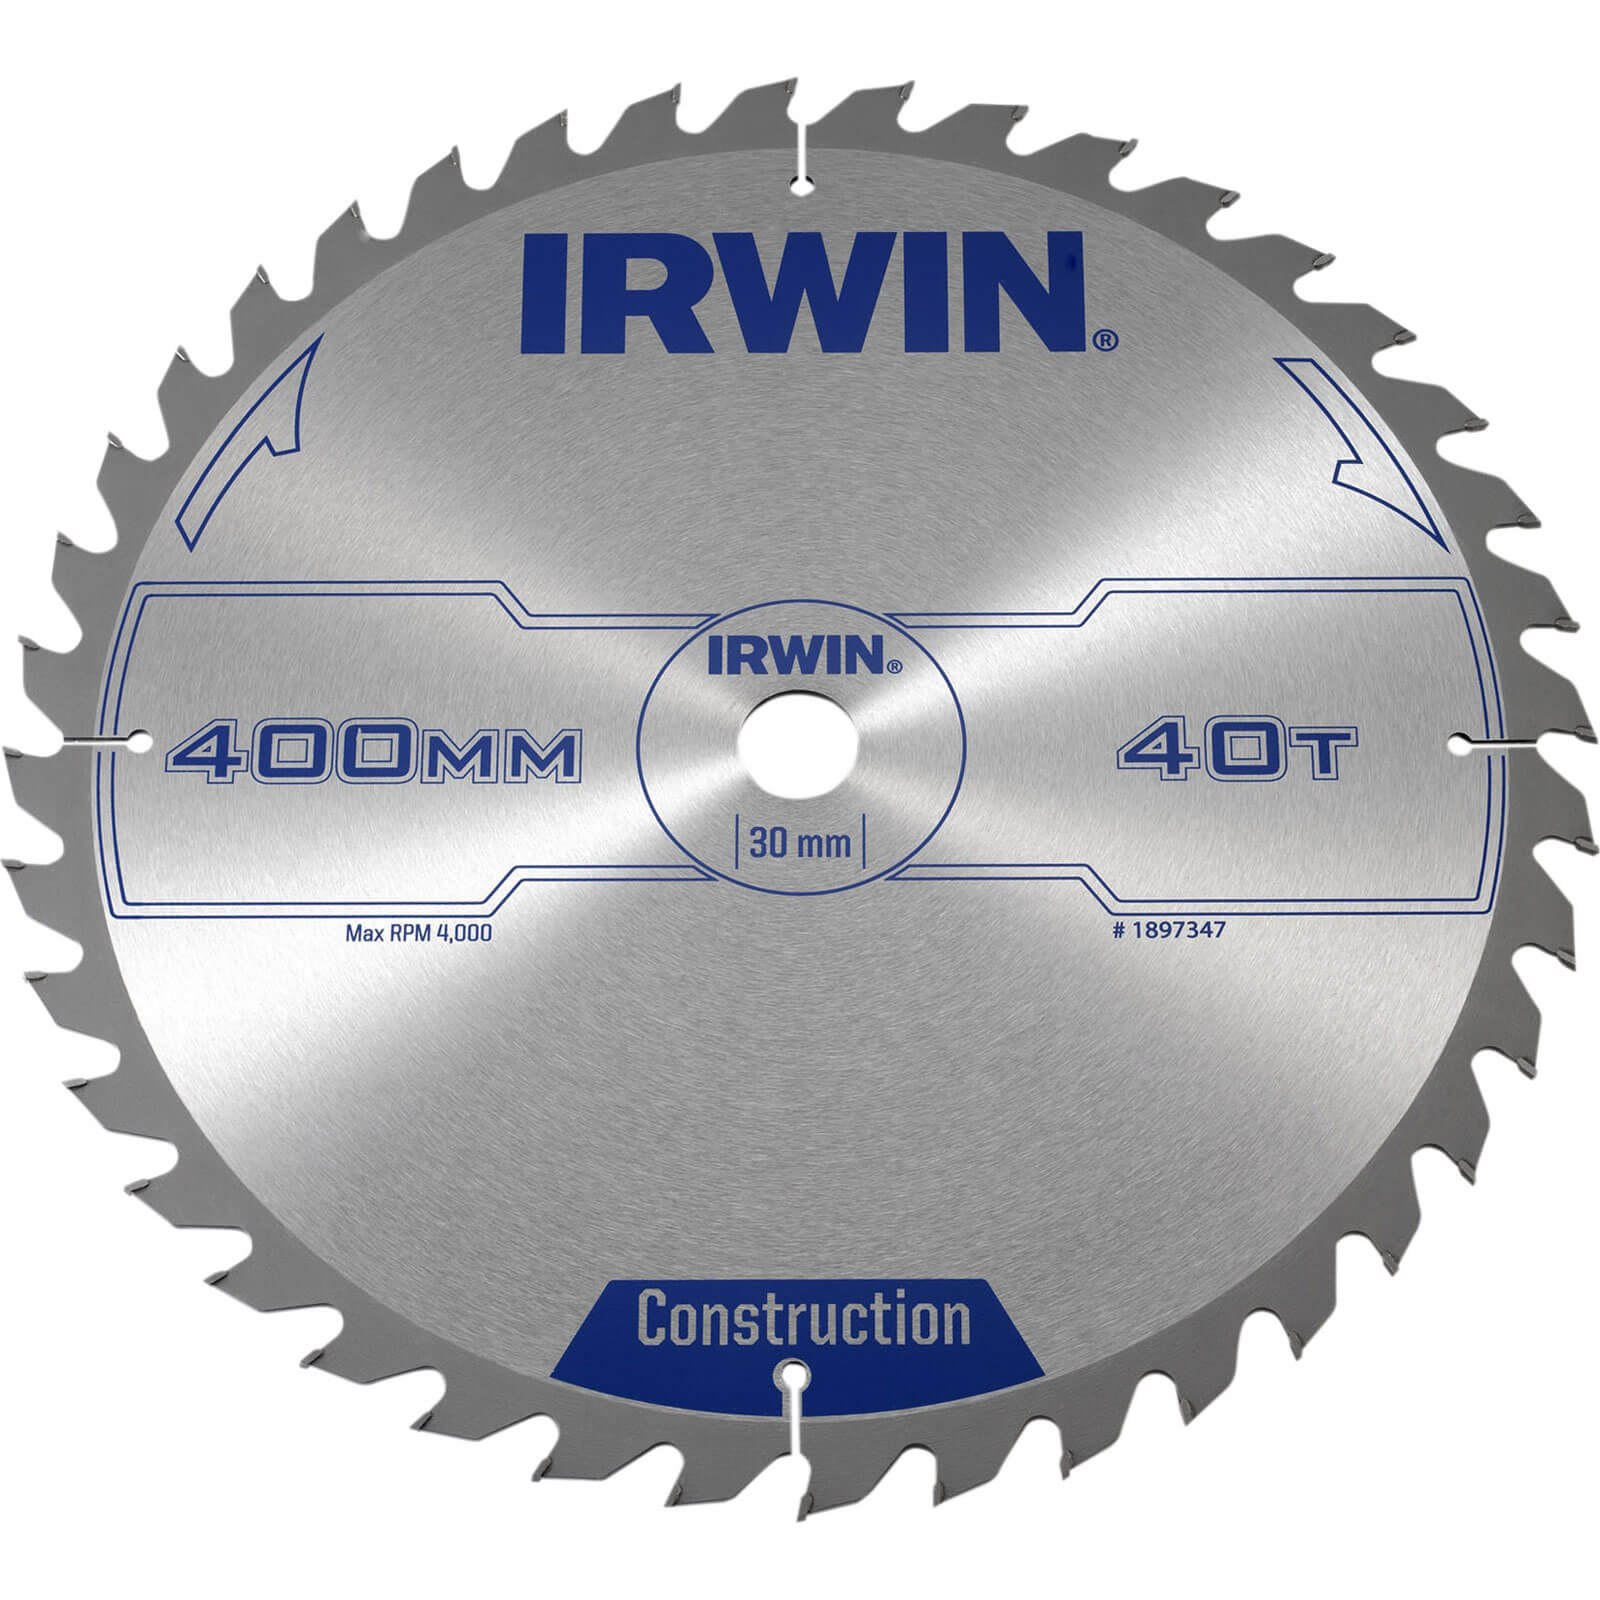 Image of Irwin ATB Construction Circular Saw Blade 400mm 40T 30mm